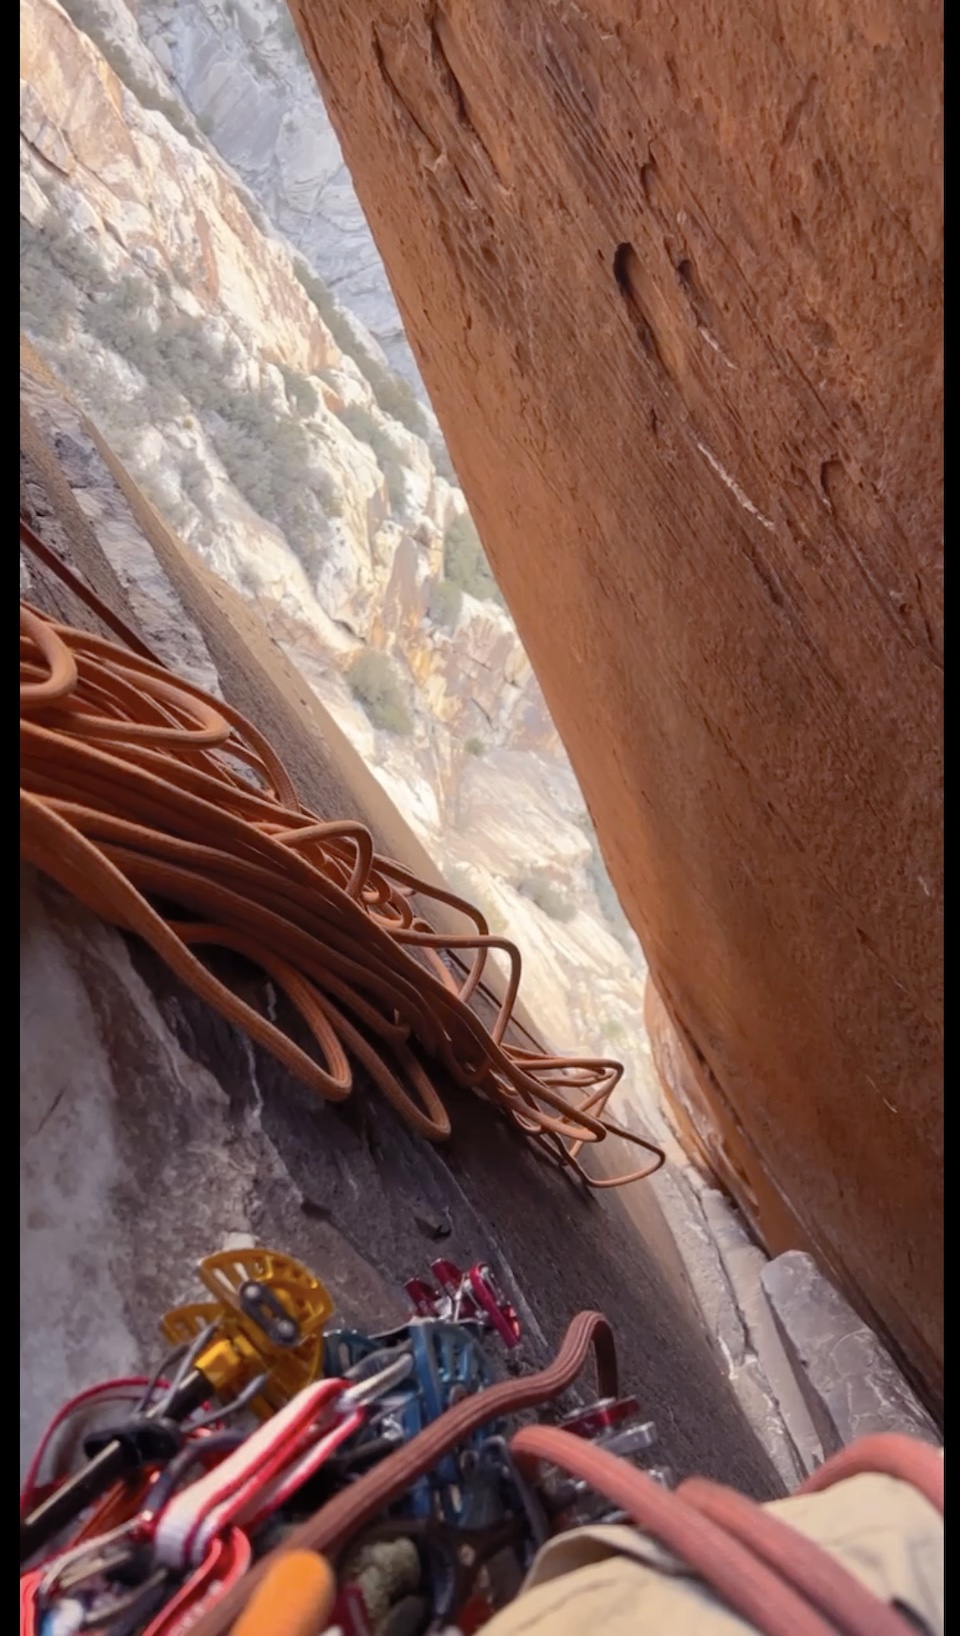 Challenging climb at Red Rock